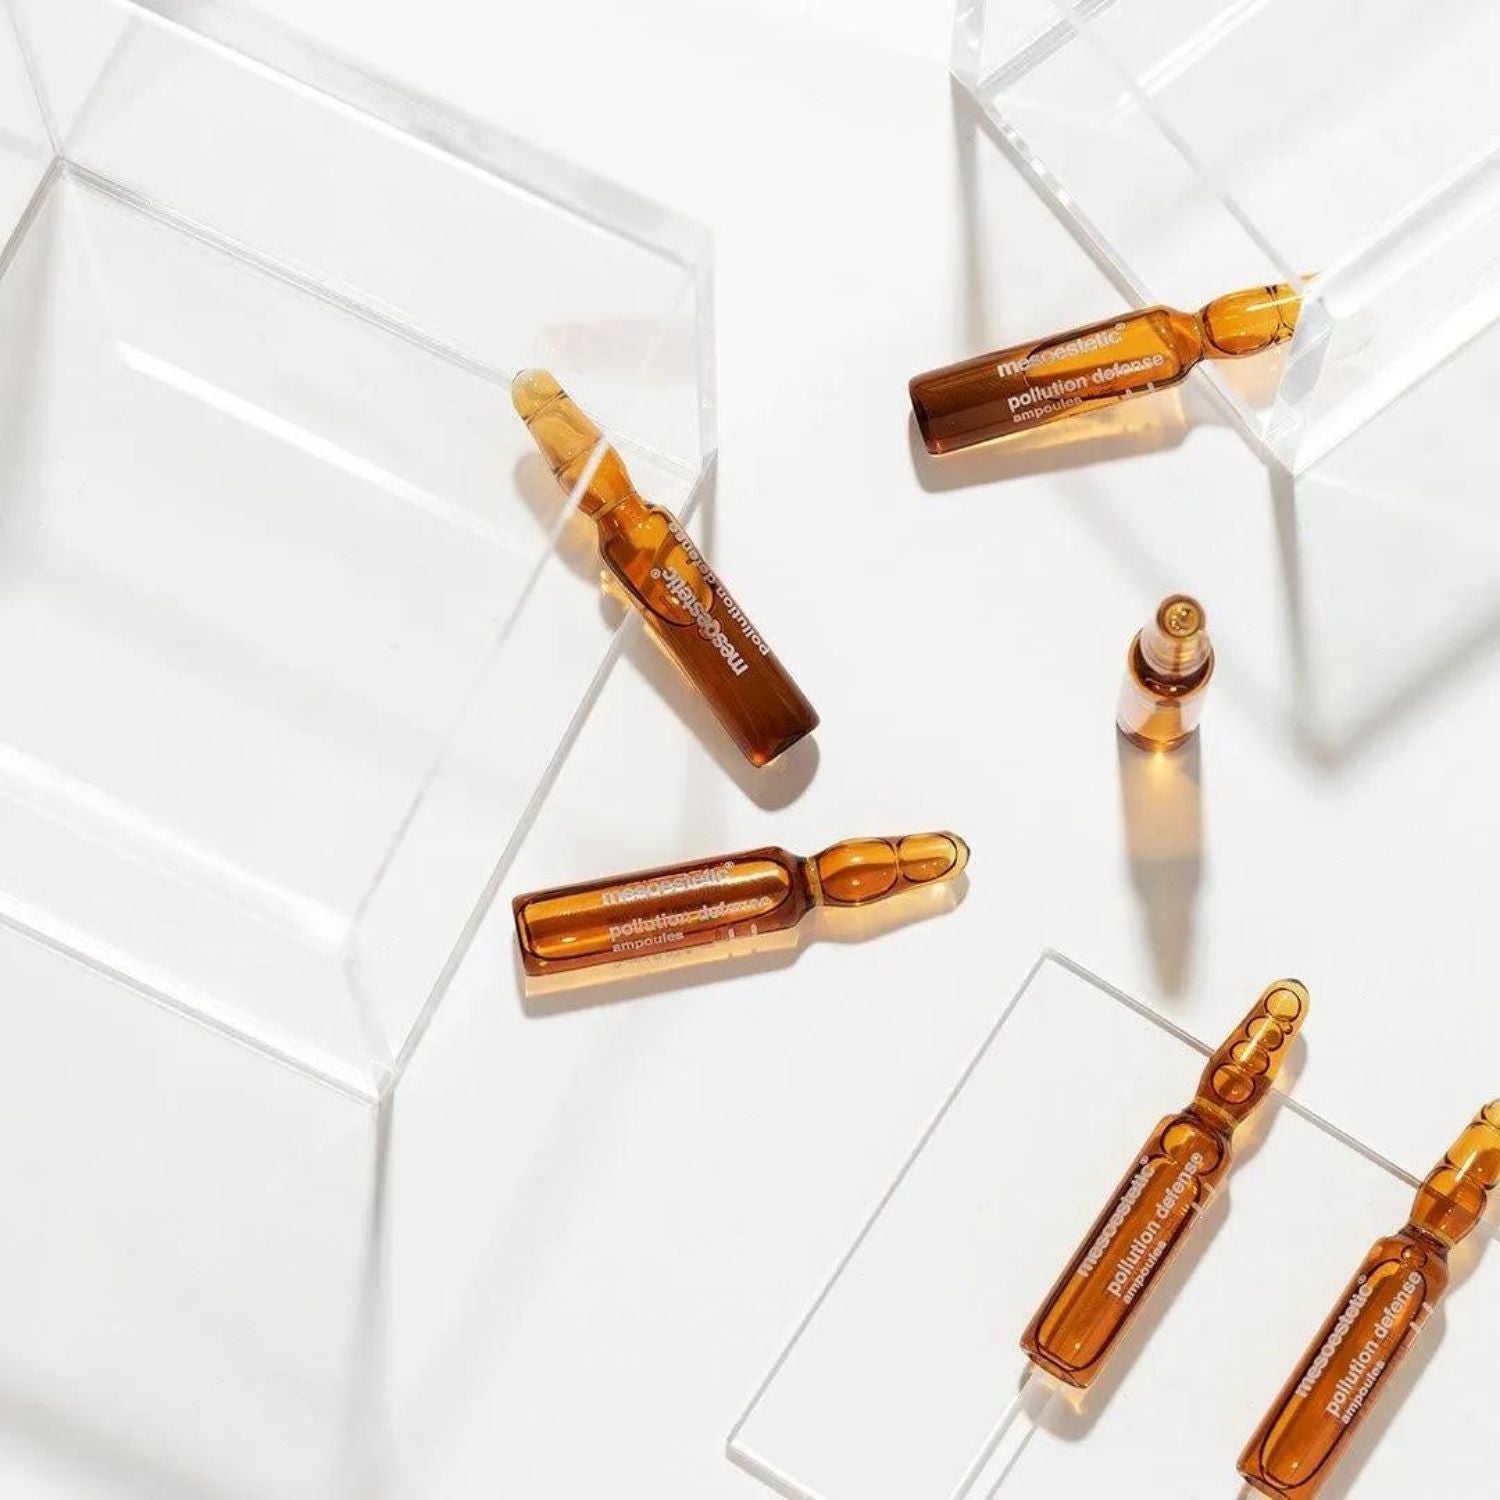 mesoestetic Pollution Defense Ampoules - Dr. Pen Store - mesoestetic Buy Genuine Dr Pen Products with Trust